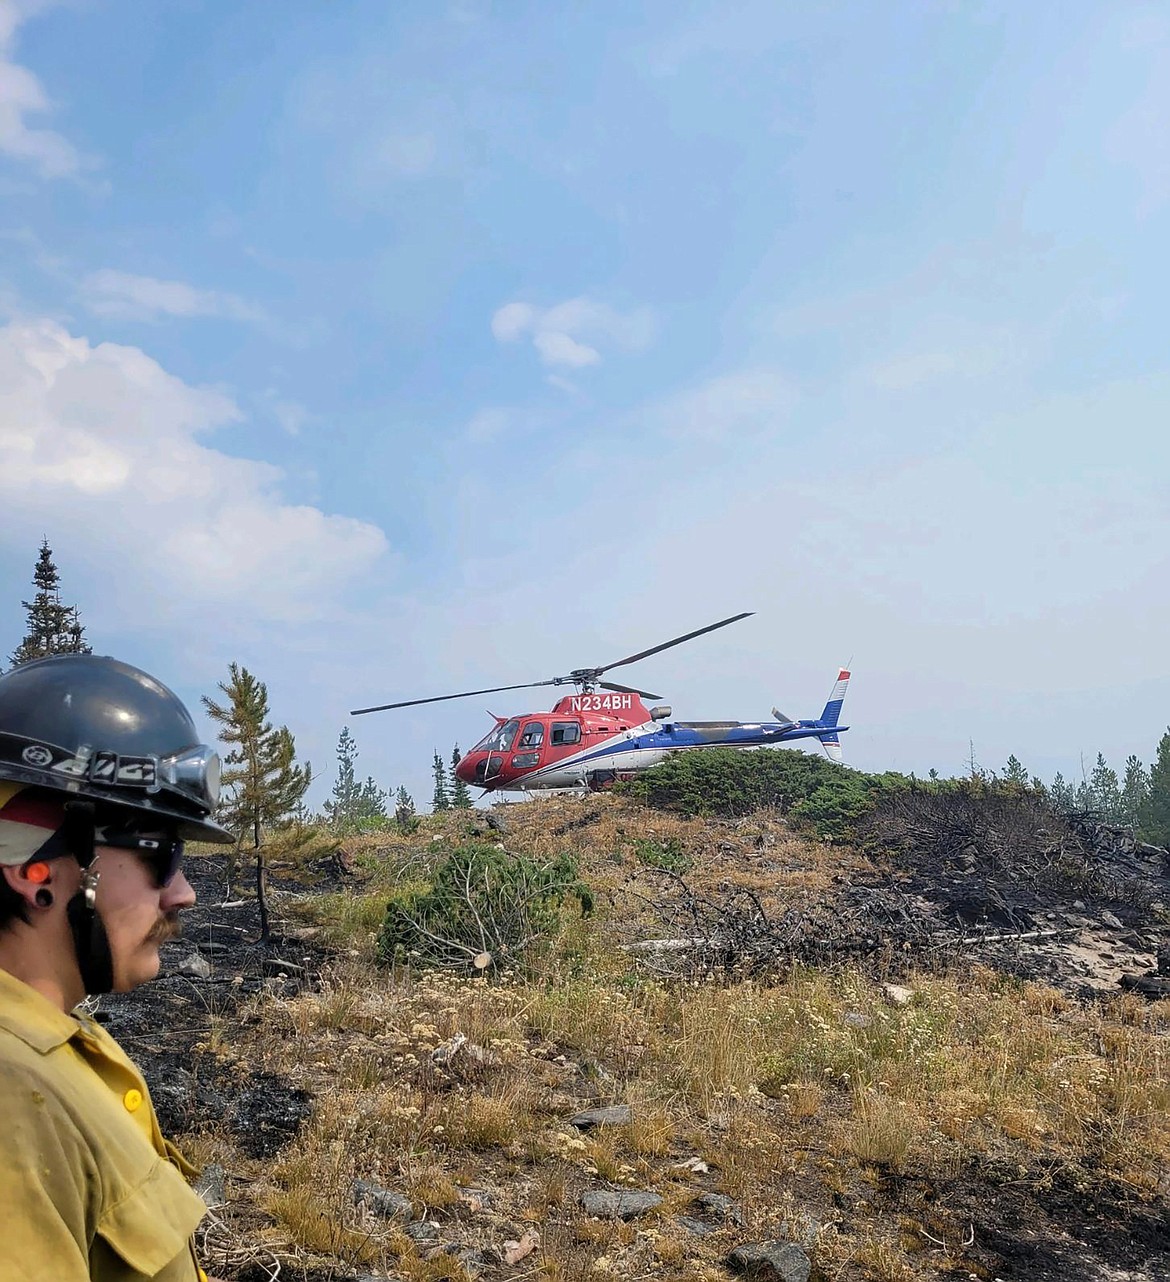 Firefighters are dropped off on Eneas Peak on Aug. 20. The fire is now part of the Kootenai River Complex, which has burned just under 11,000 acres.